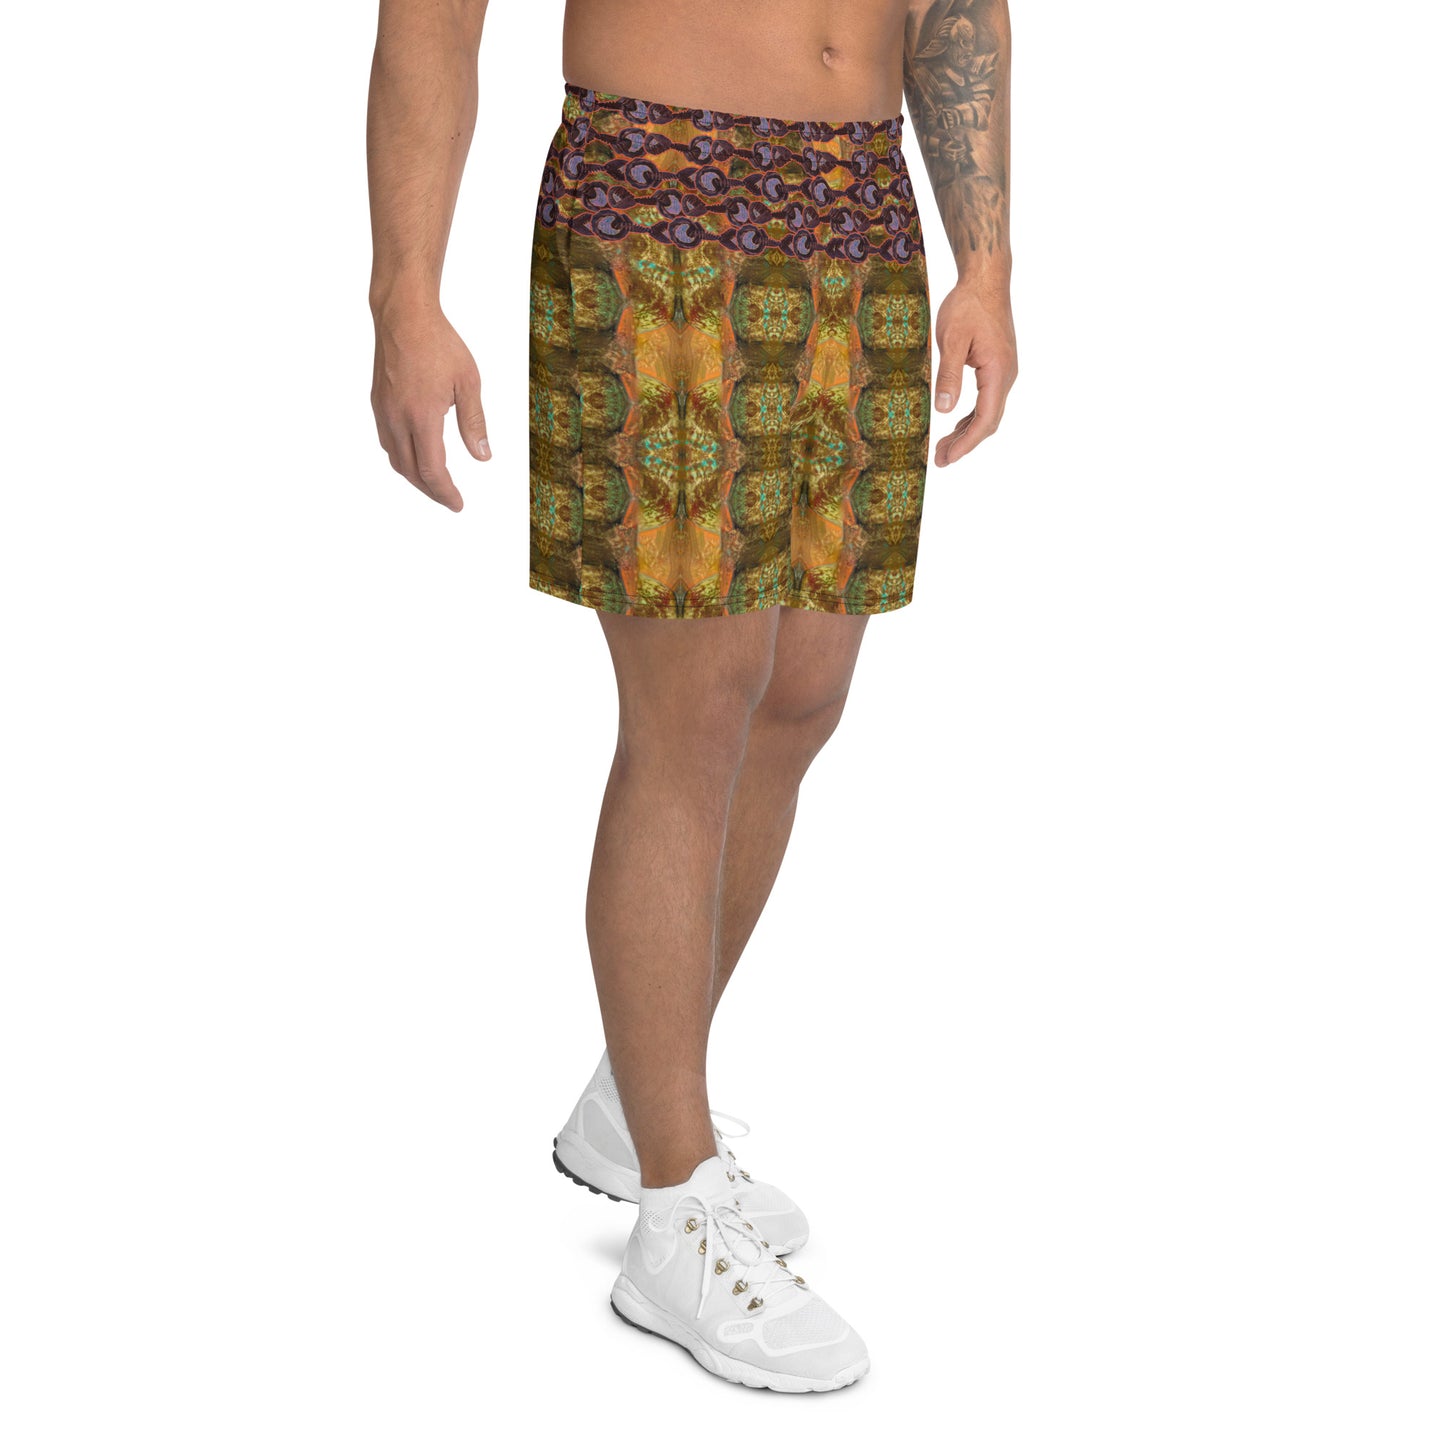 Athletic Long Shorts (His/They)(Grail Night Rose Purple Logo) RJSTH@Fabric#6 RJSTHS2021 RJS